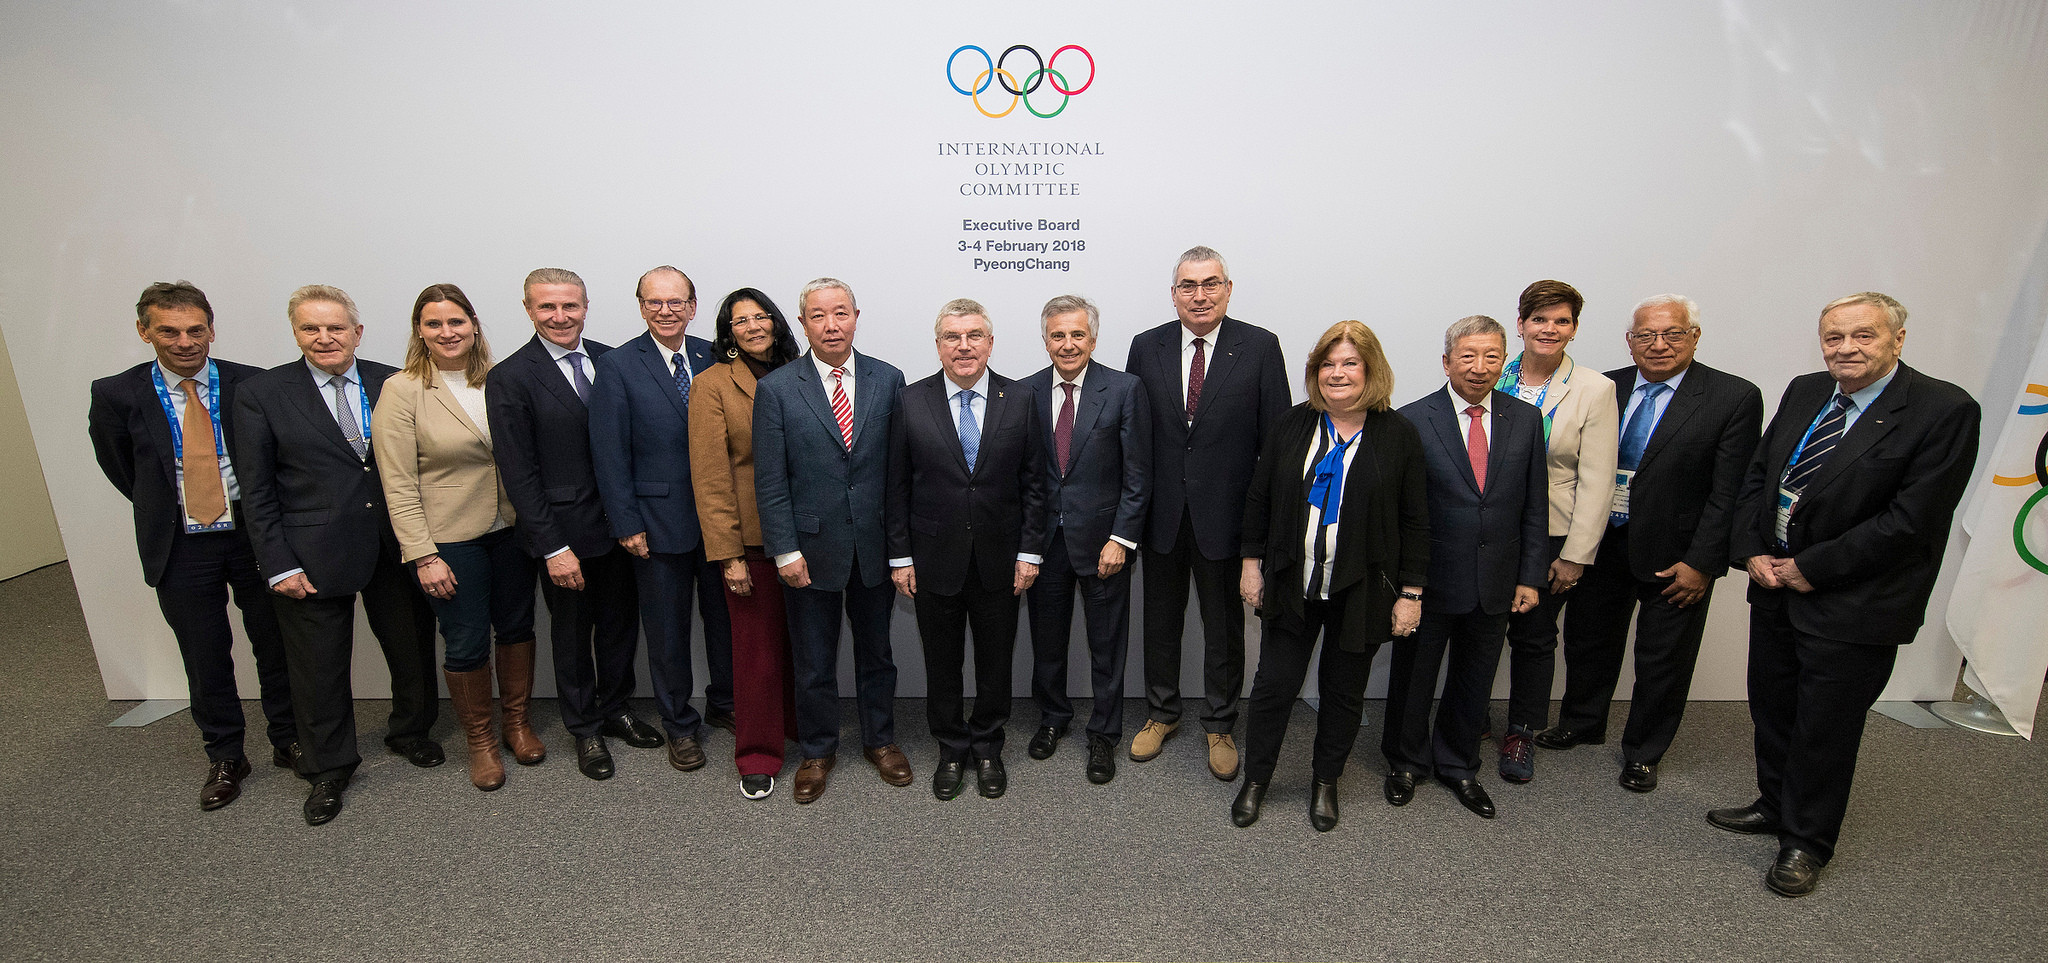 IOC Executive Board members pose following their meeting ©IOC/Flickr